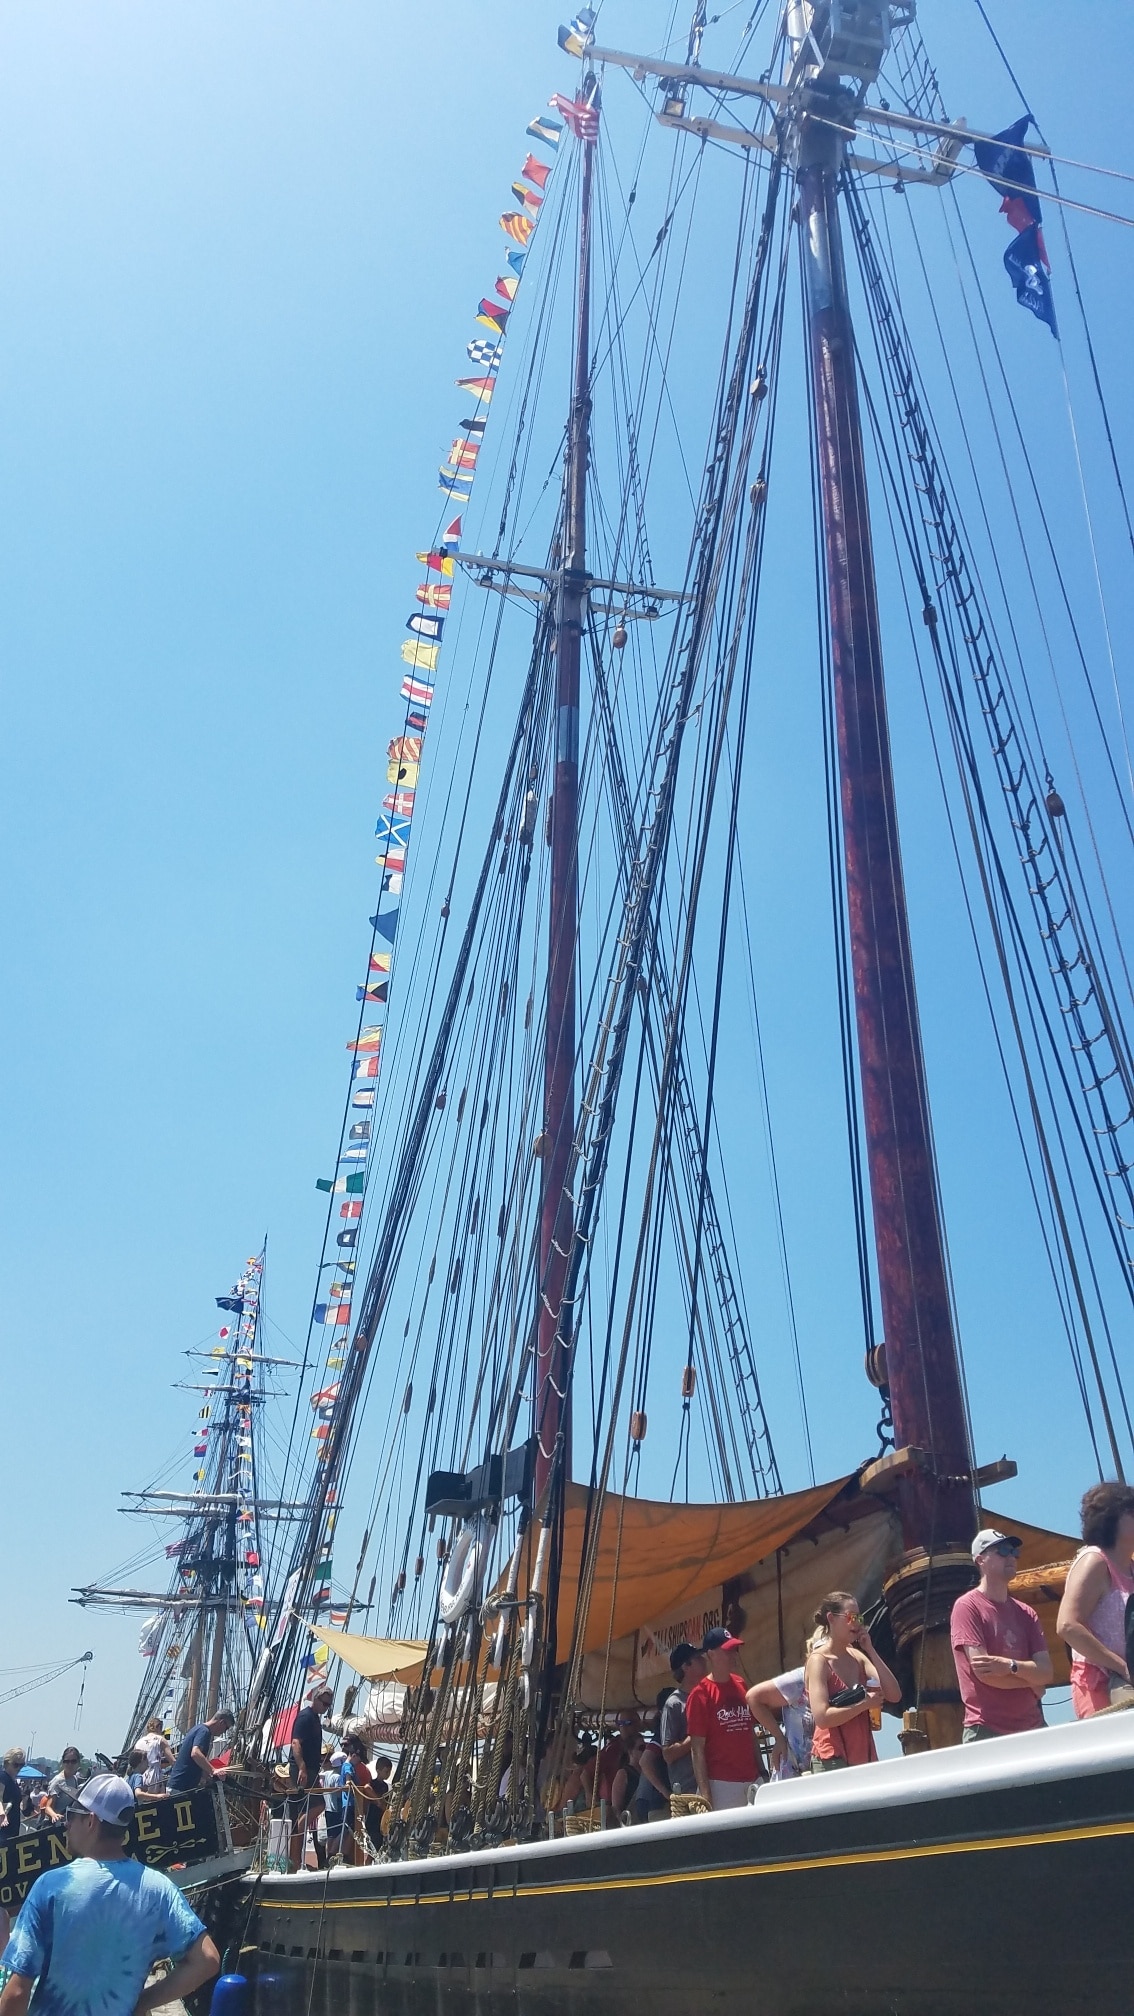 Cleveland Tall Ships Festival 2019. 
Ships from as far away as New Zealand. 11 total.  Ticket cost includes entry to each ship for a quick walk around.